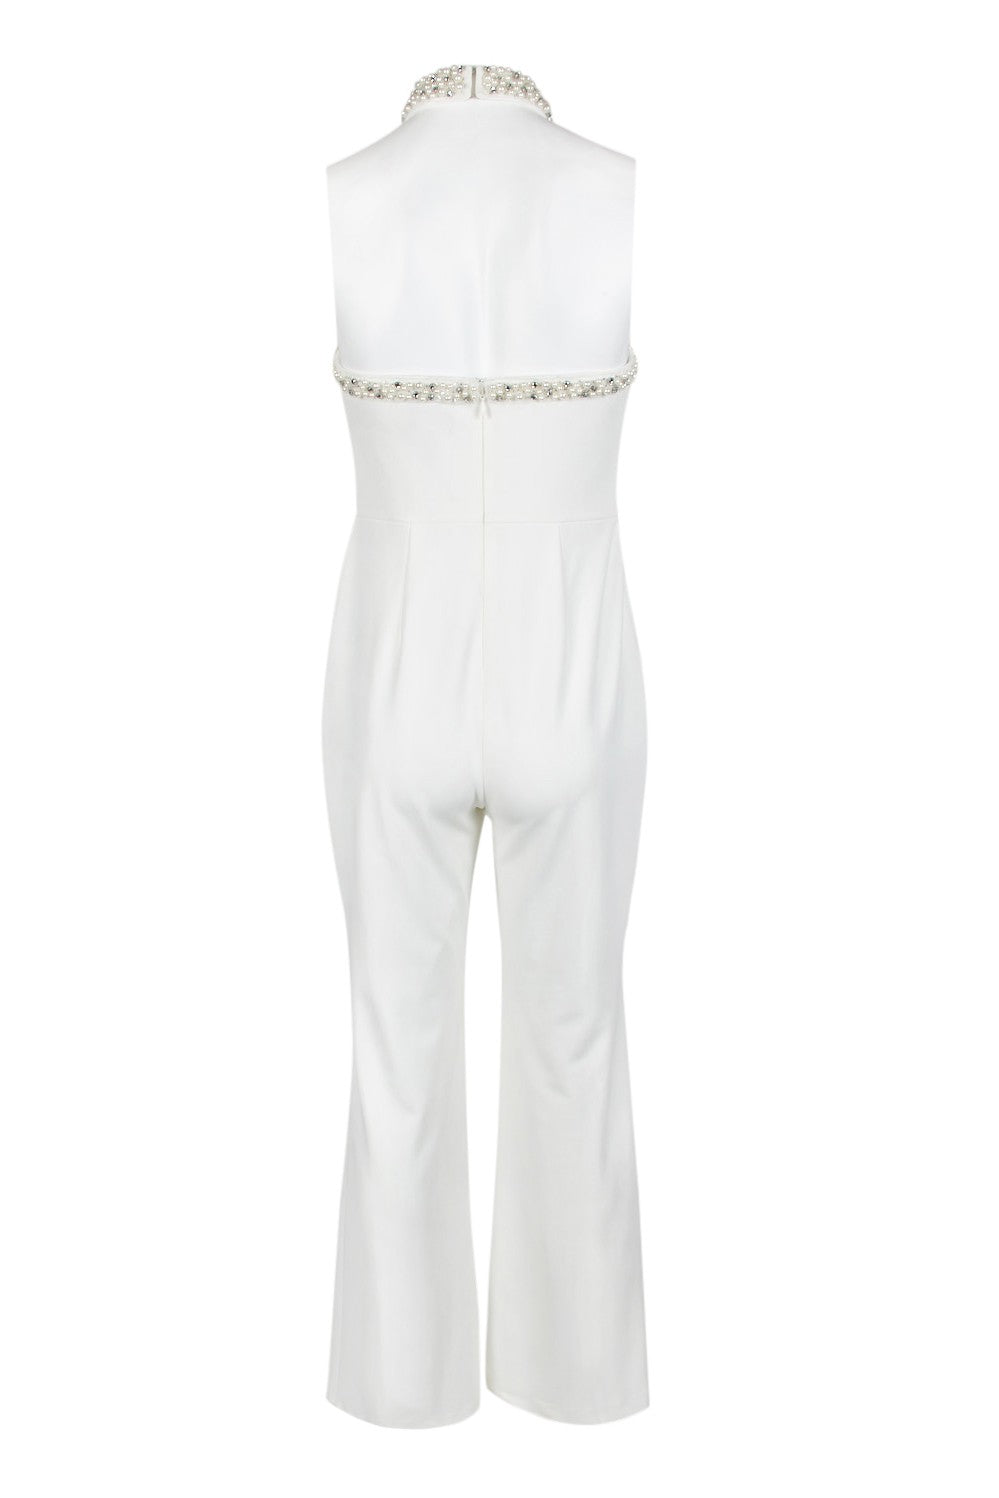 Adrianna Papell Embellished Stretch Crepe Jumpsuit